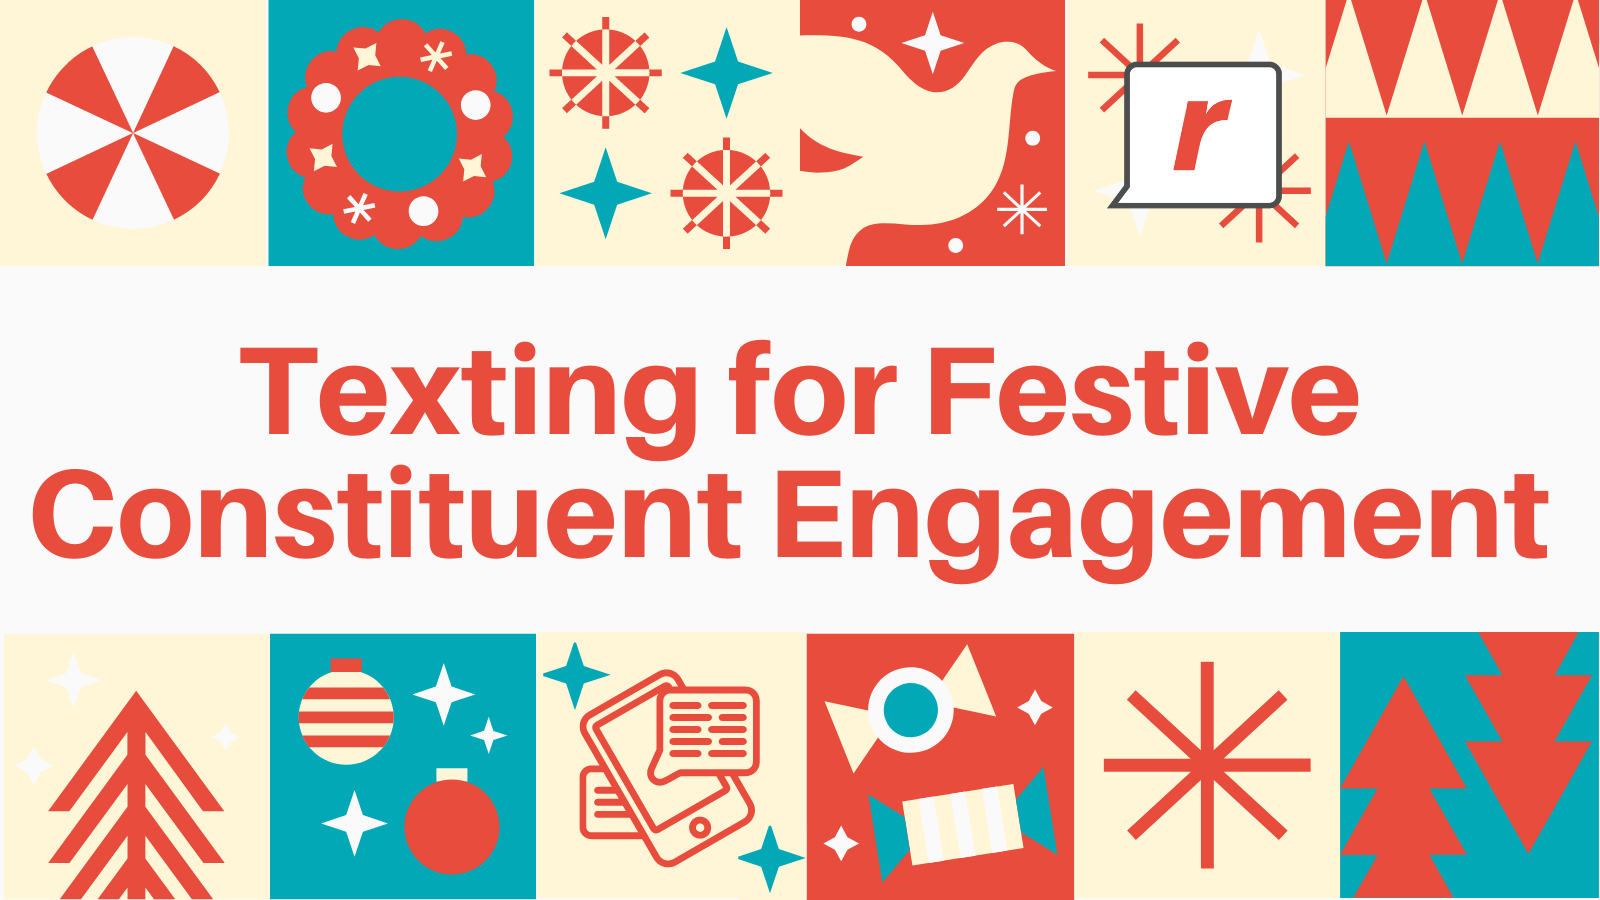 How to Use Texting for Festive Constituent Engagement 